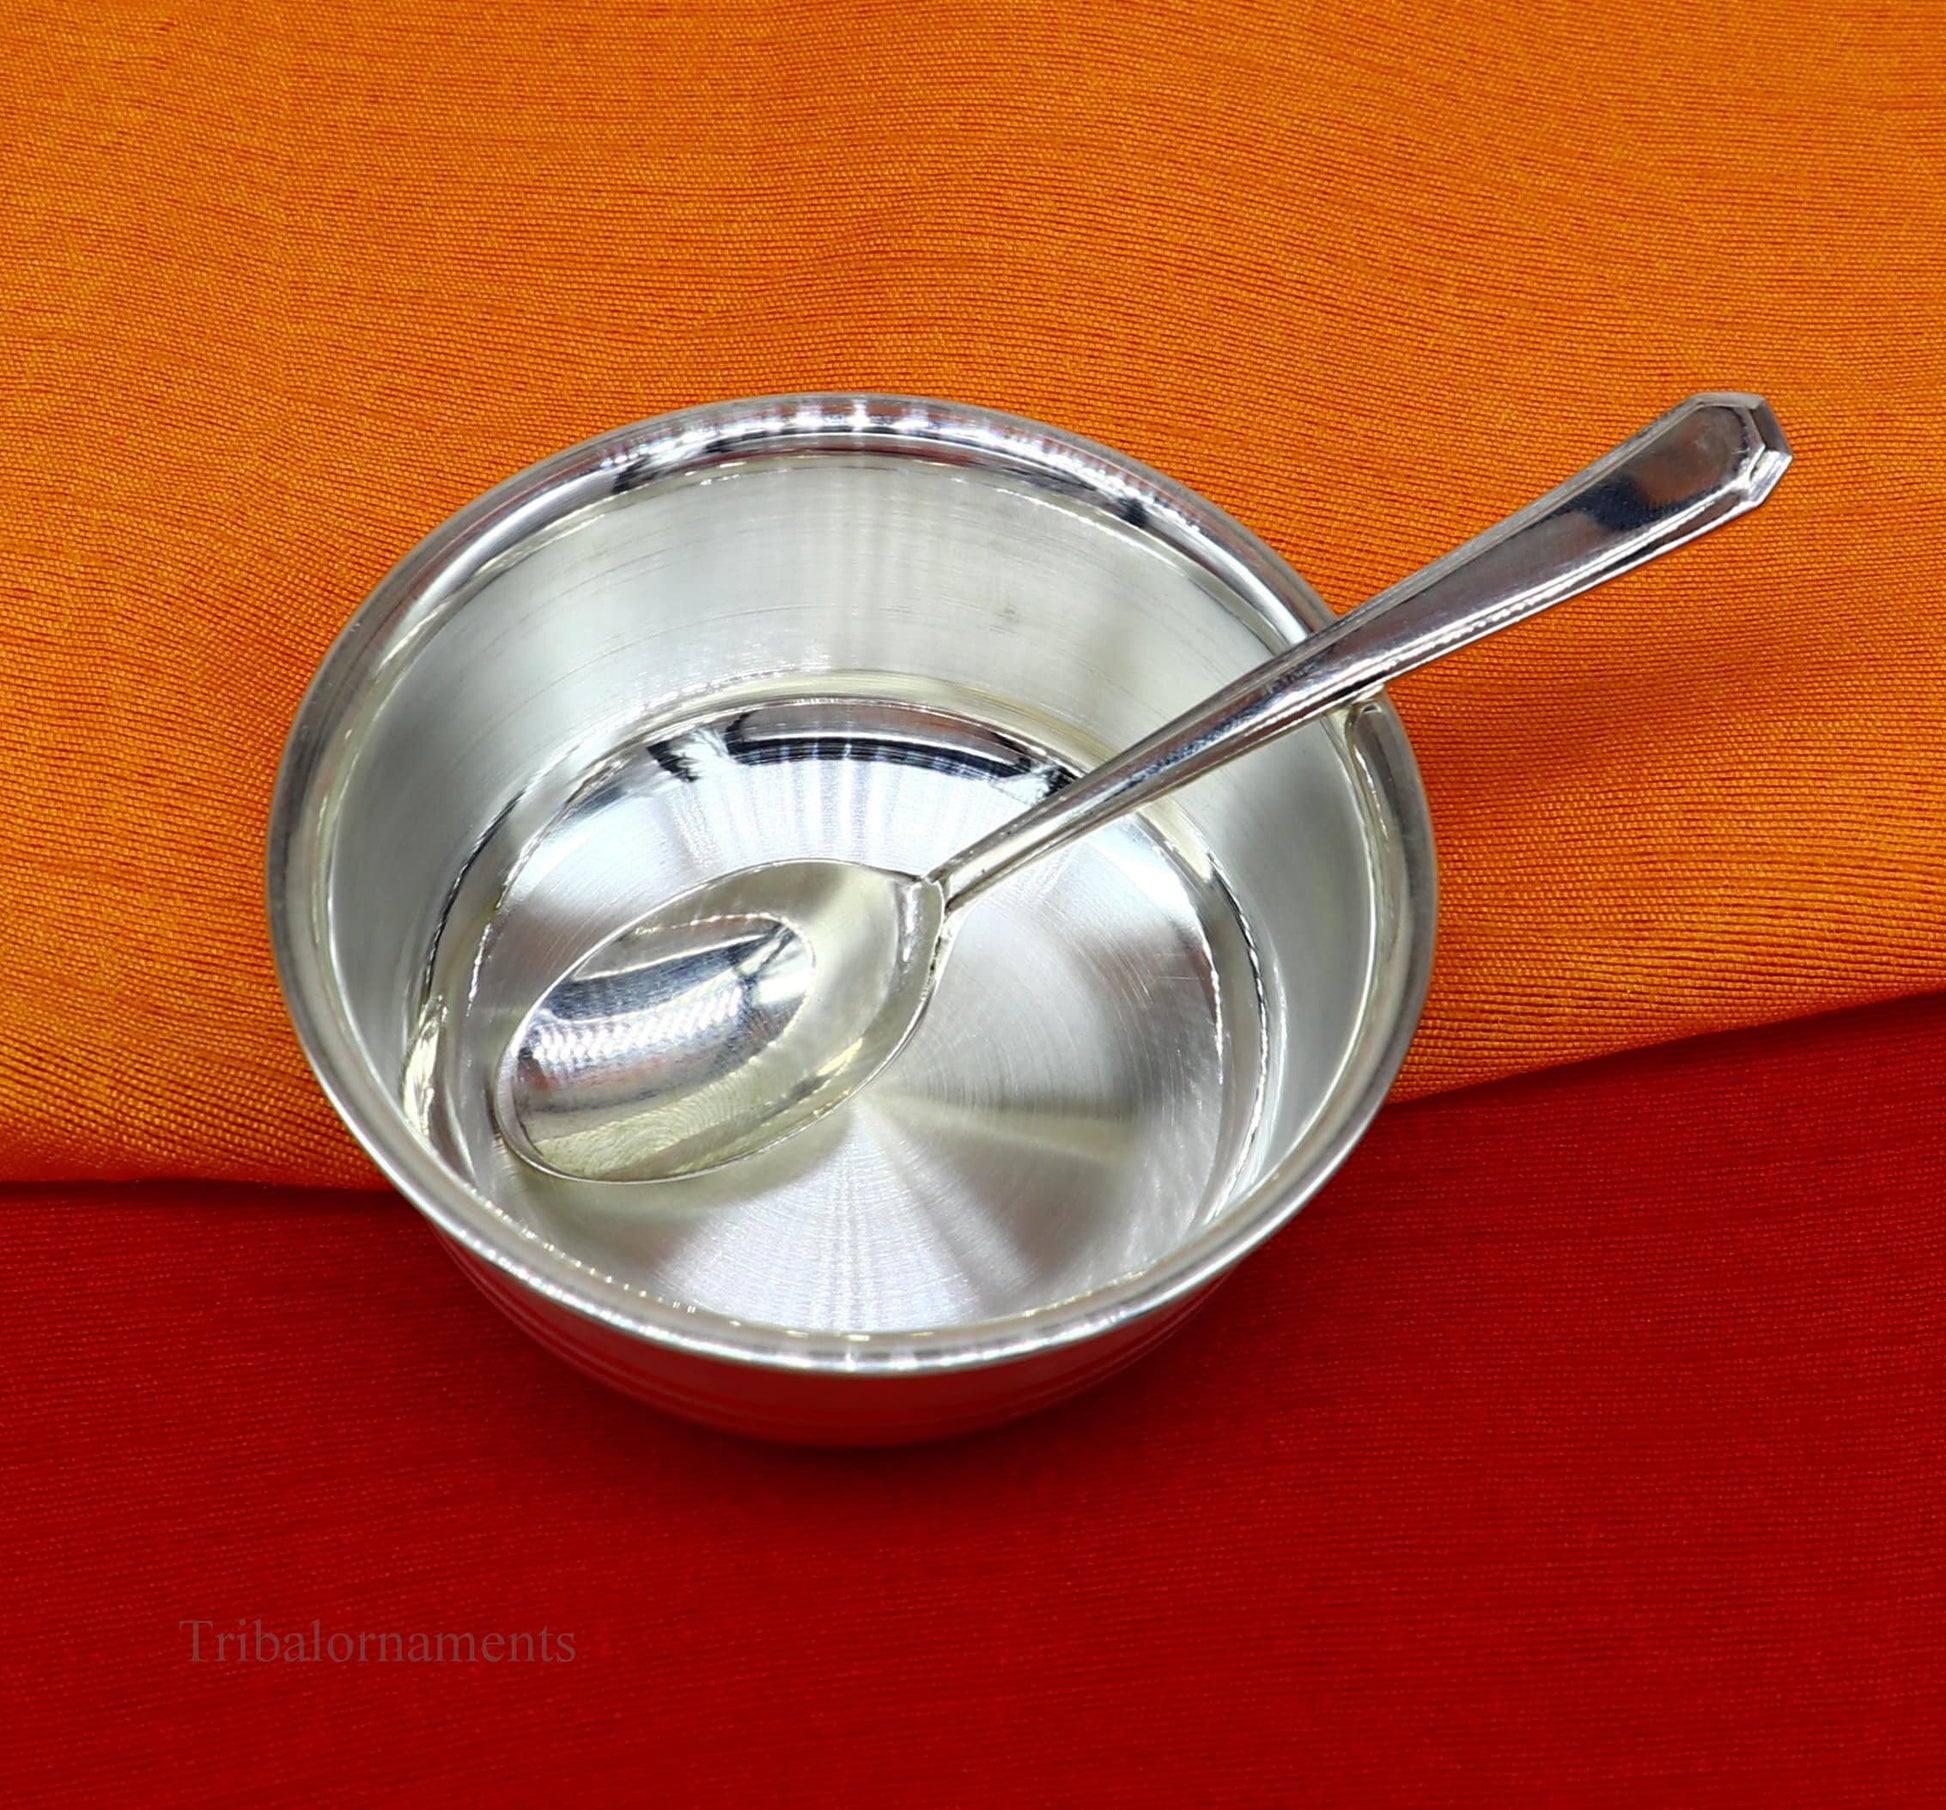 999 fine solid silver handmade small bowl for baby serving, pure silver vessel, silver utensils, home kitchen accessories puja bowl sv223 - TRIBAL ORNAMENTS